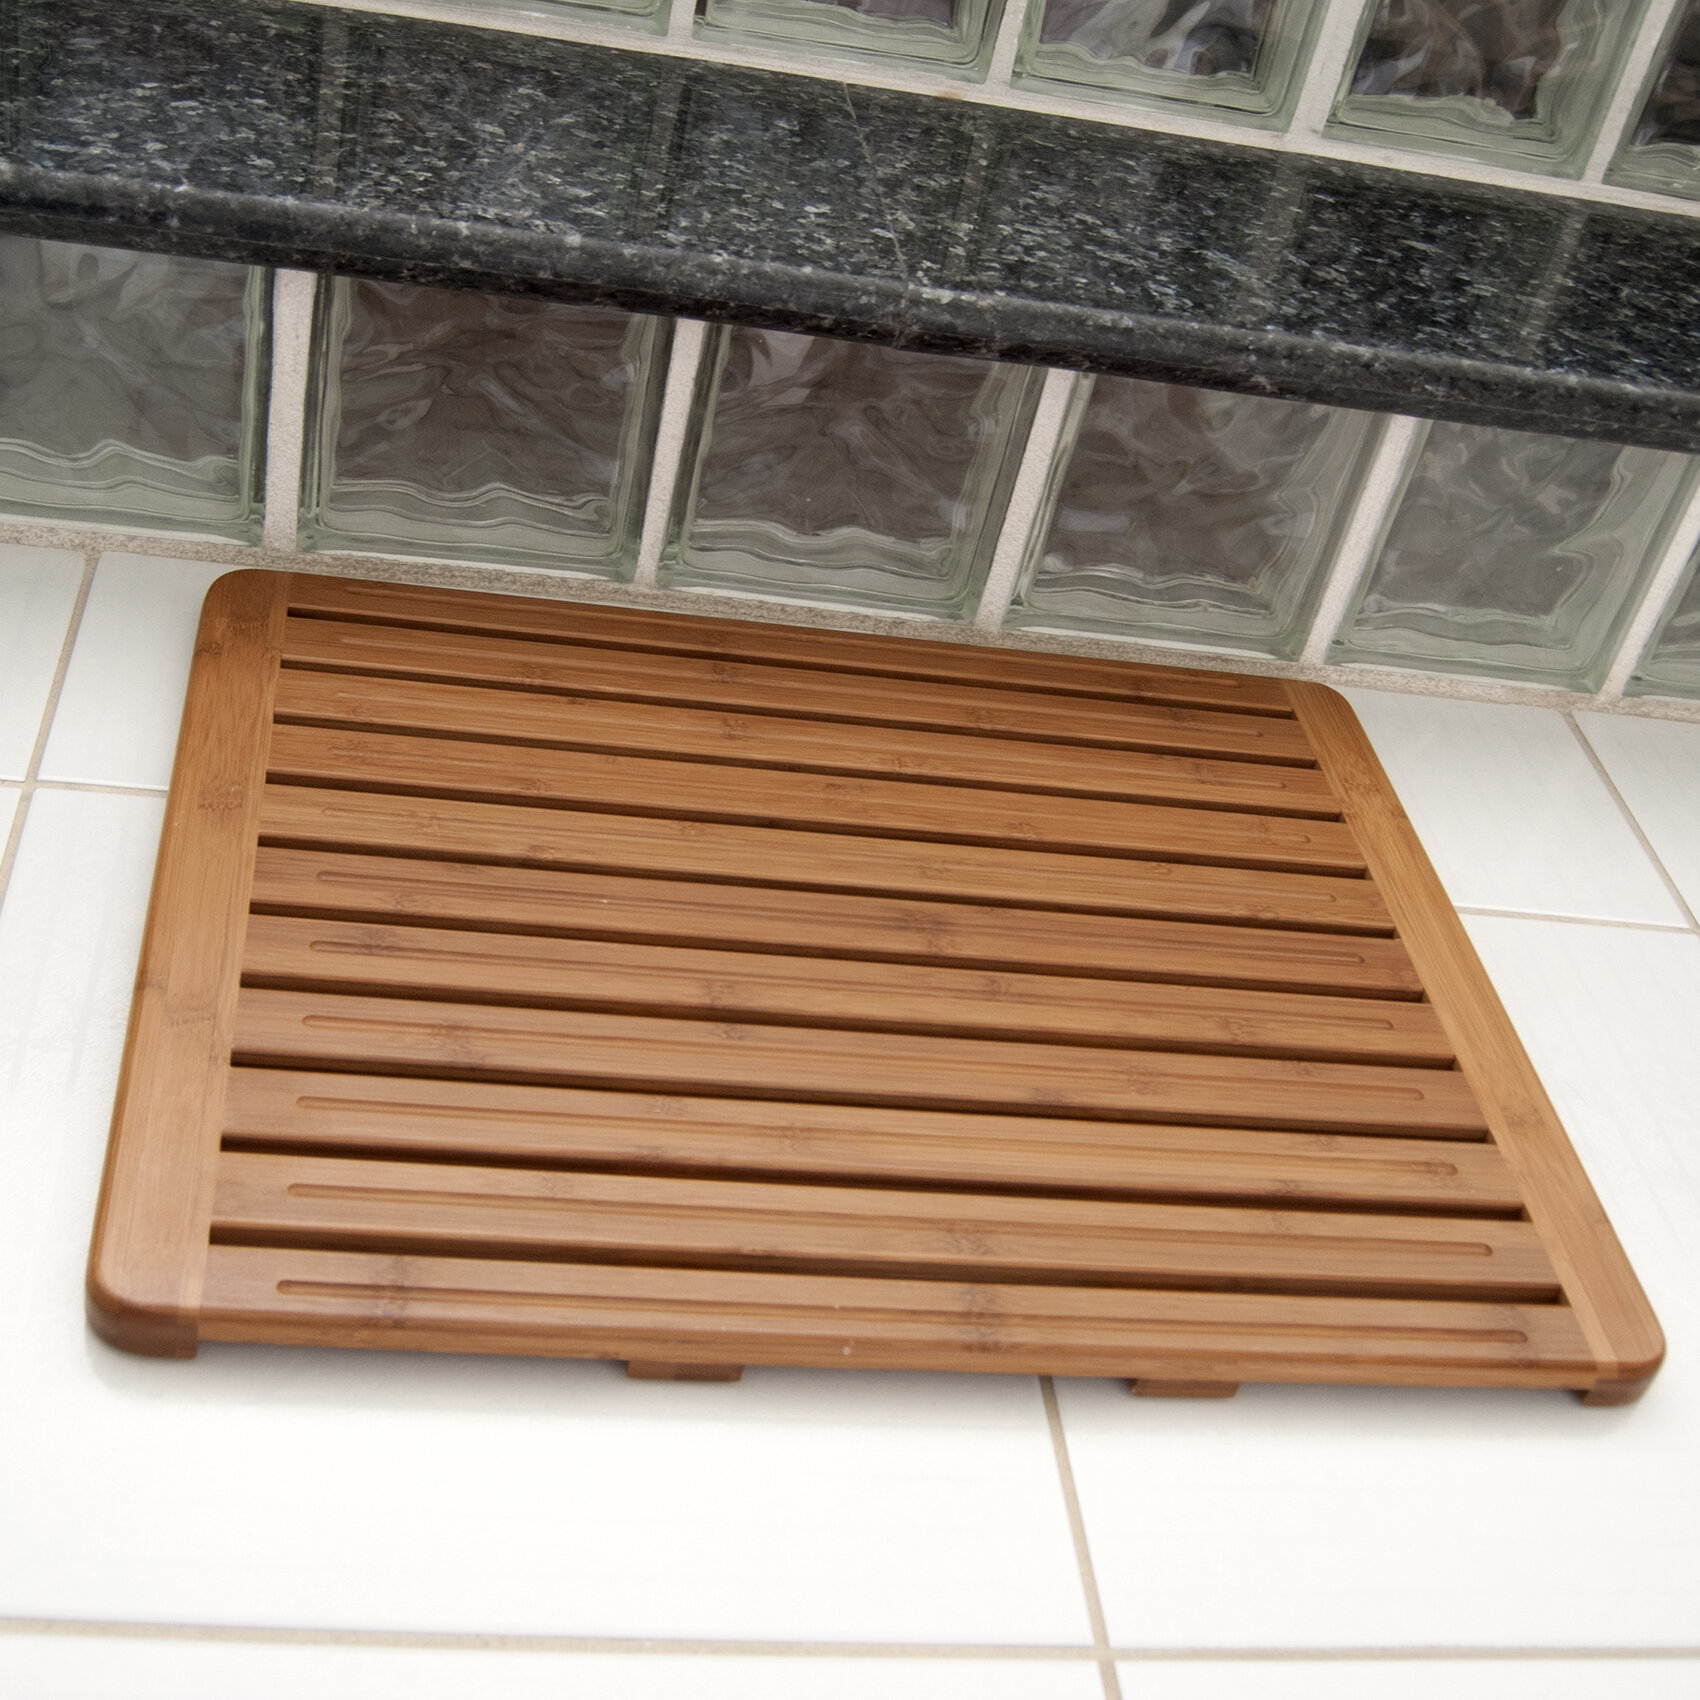 Millwood Pines Siegmar Rayon From Bamboo Bath Mat with Non-Slip Backing &  Reviews